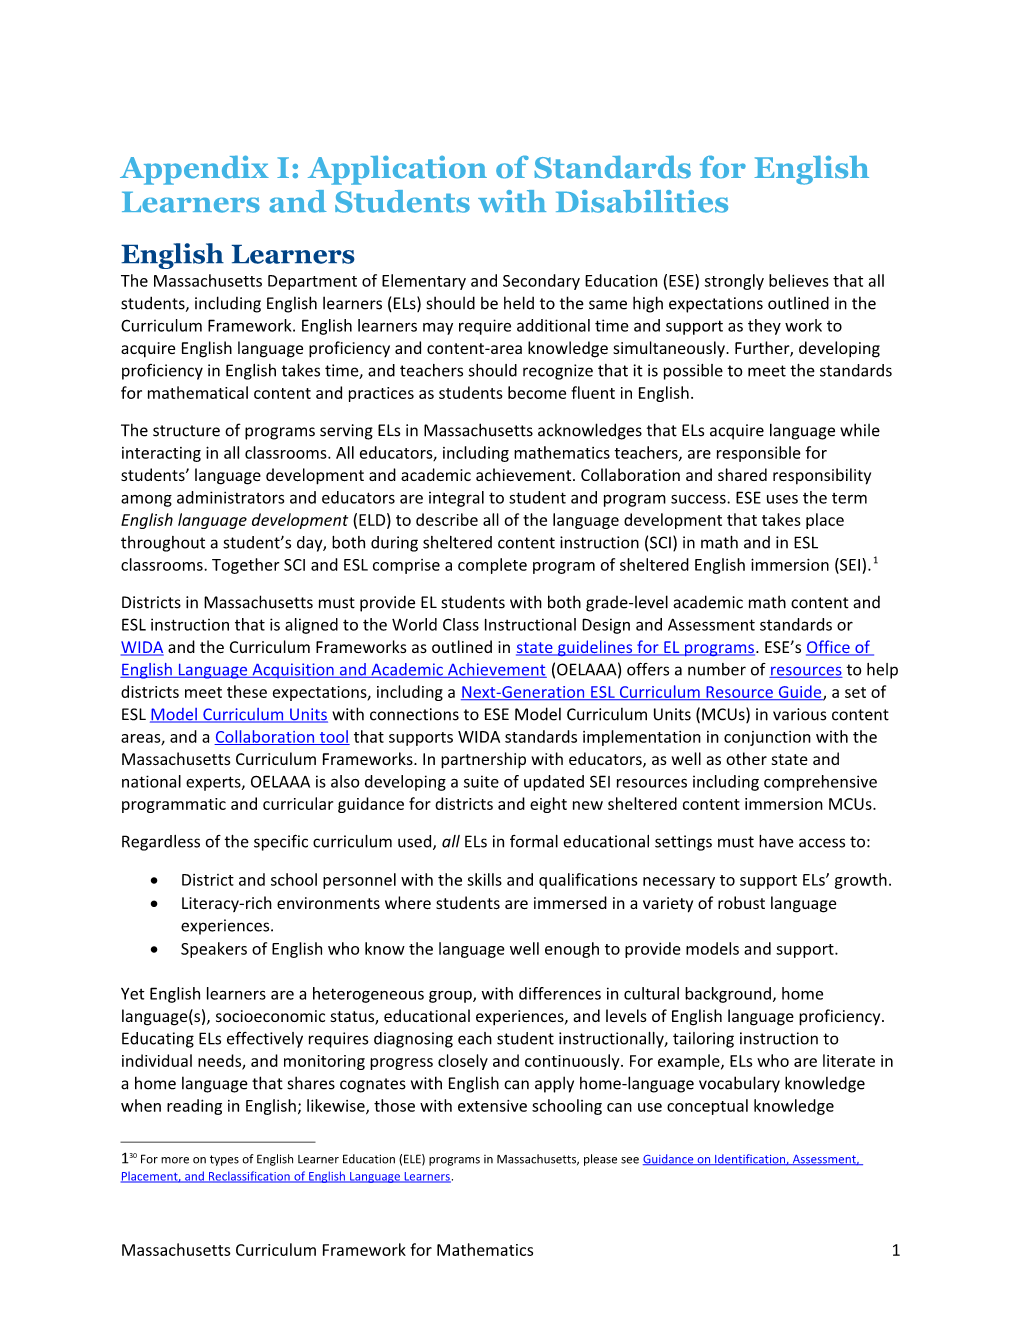 Standards for English Learners and Students with Disabilities